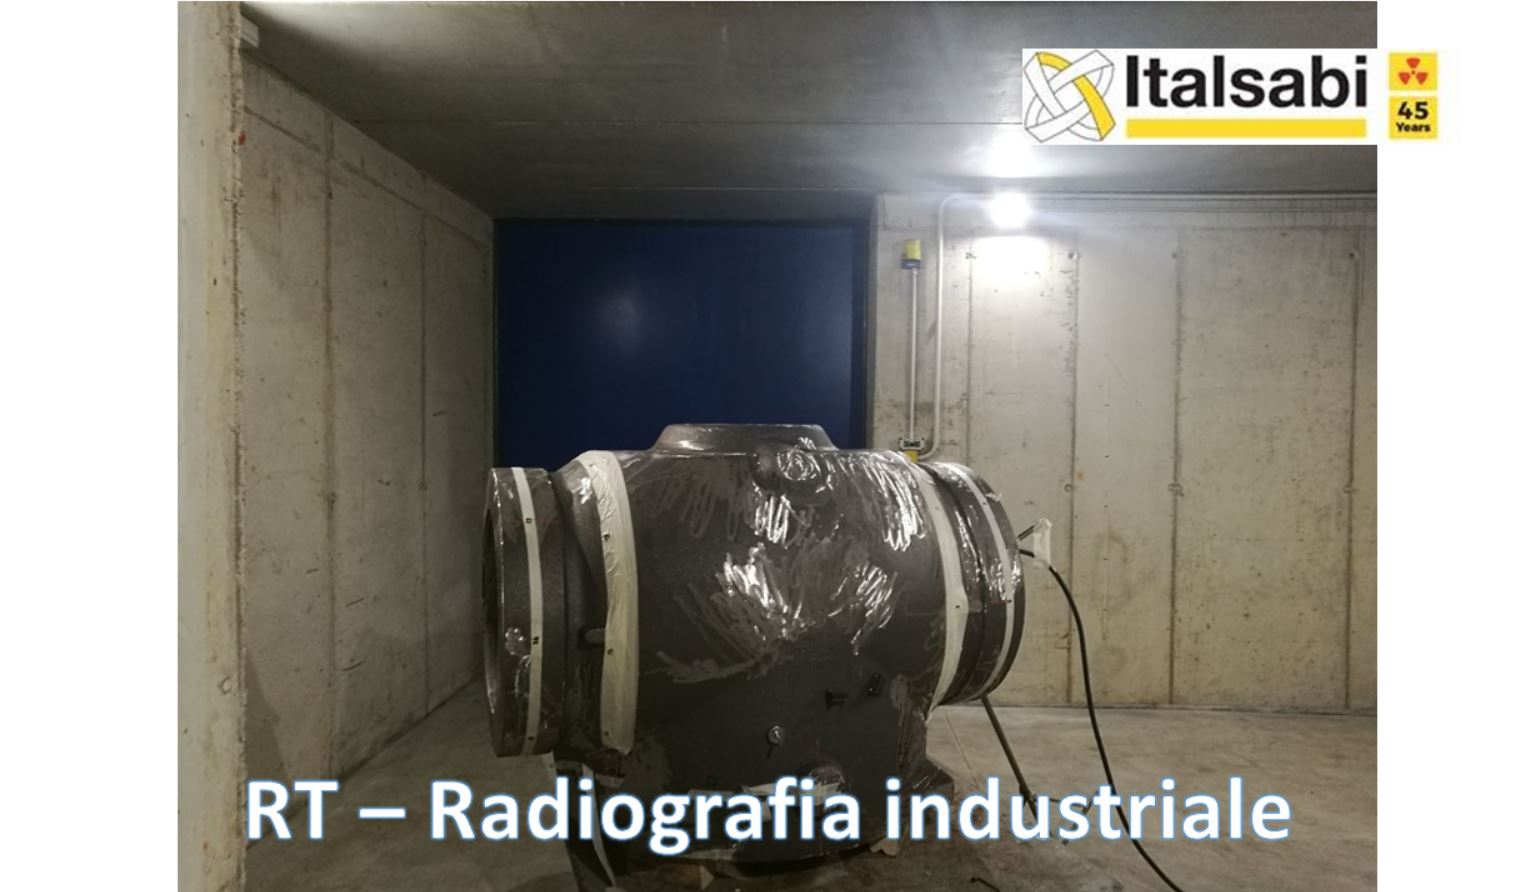 INDUSTRIAL RADIOGRAPHY